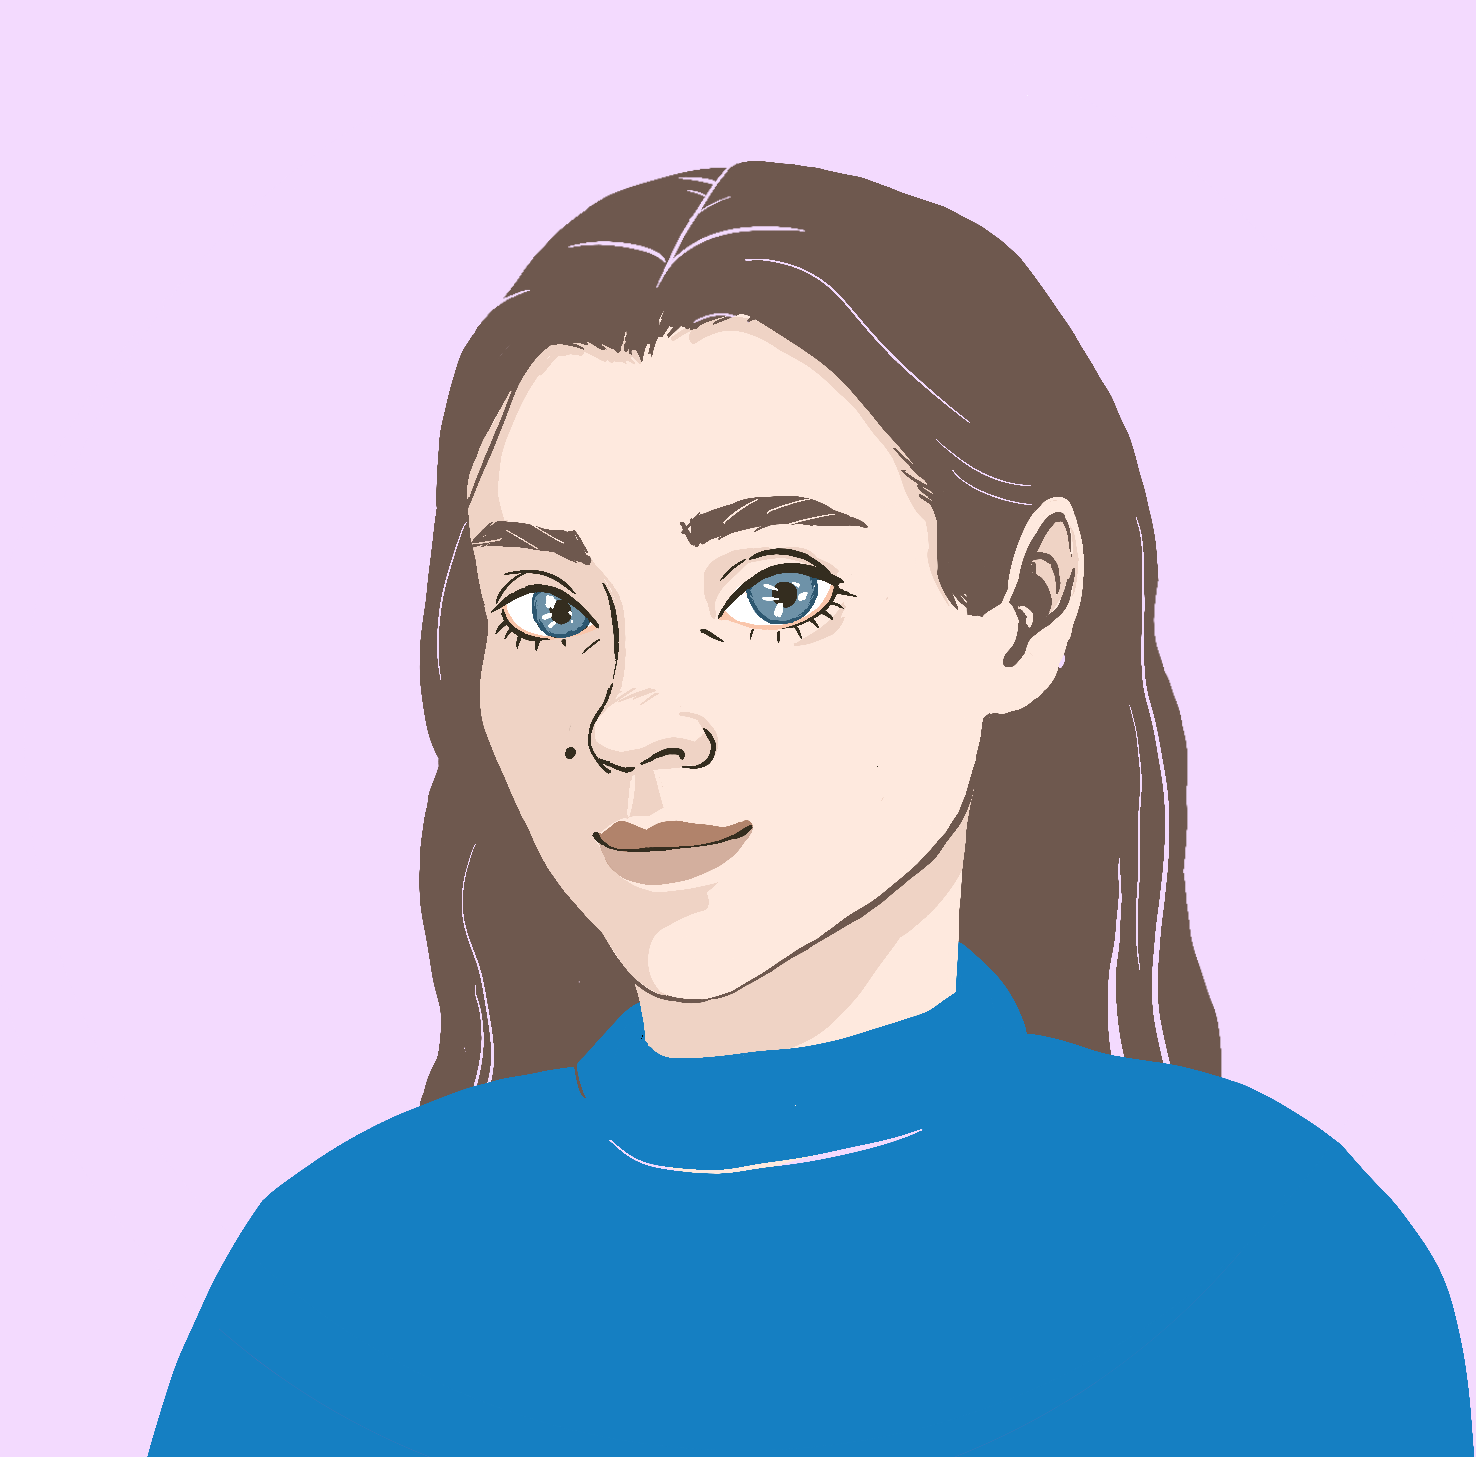 self portrait of myself: long brown hair, blue sweater and blue eyes